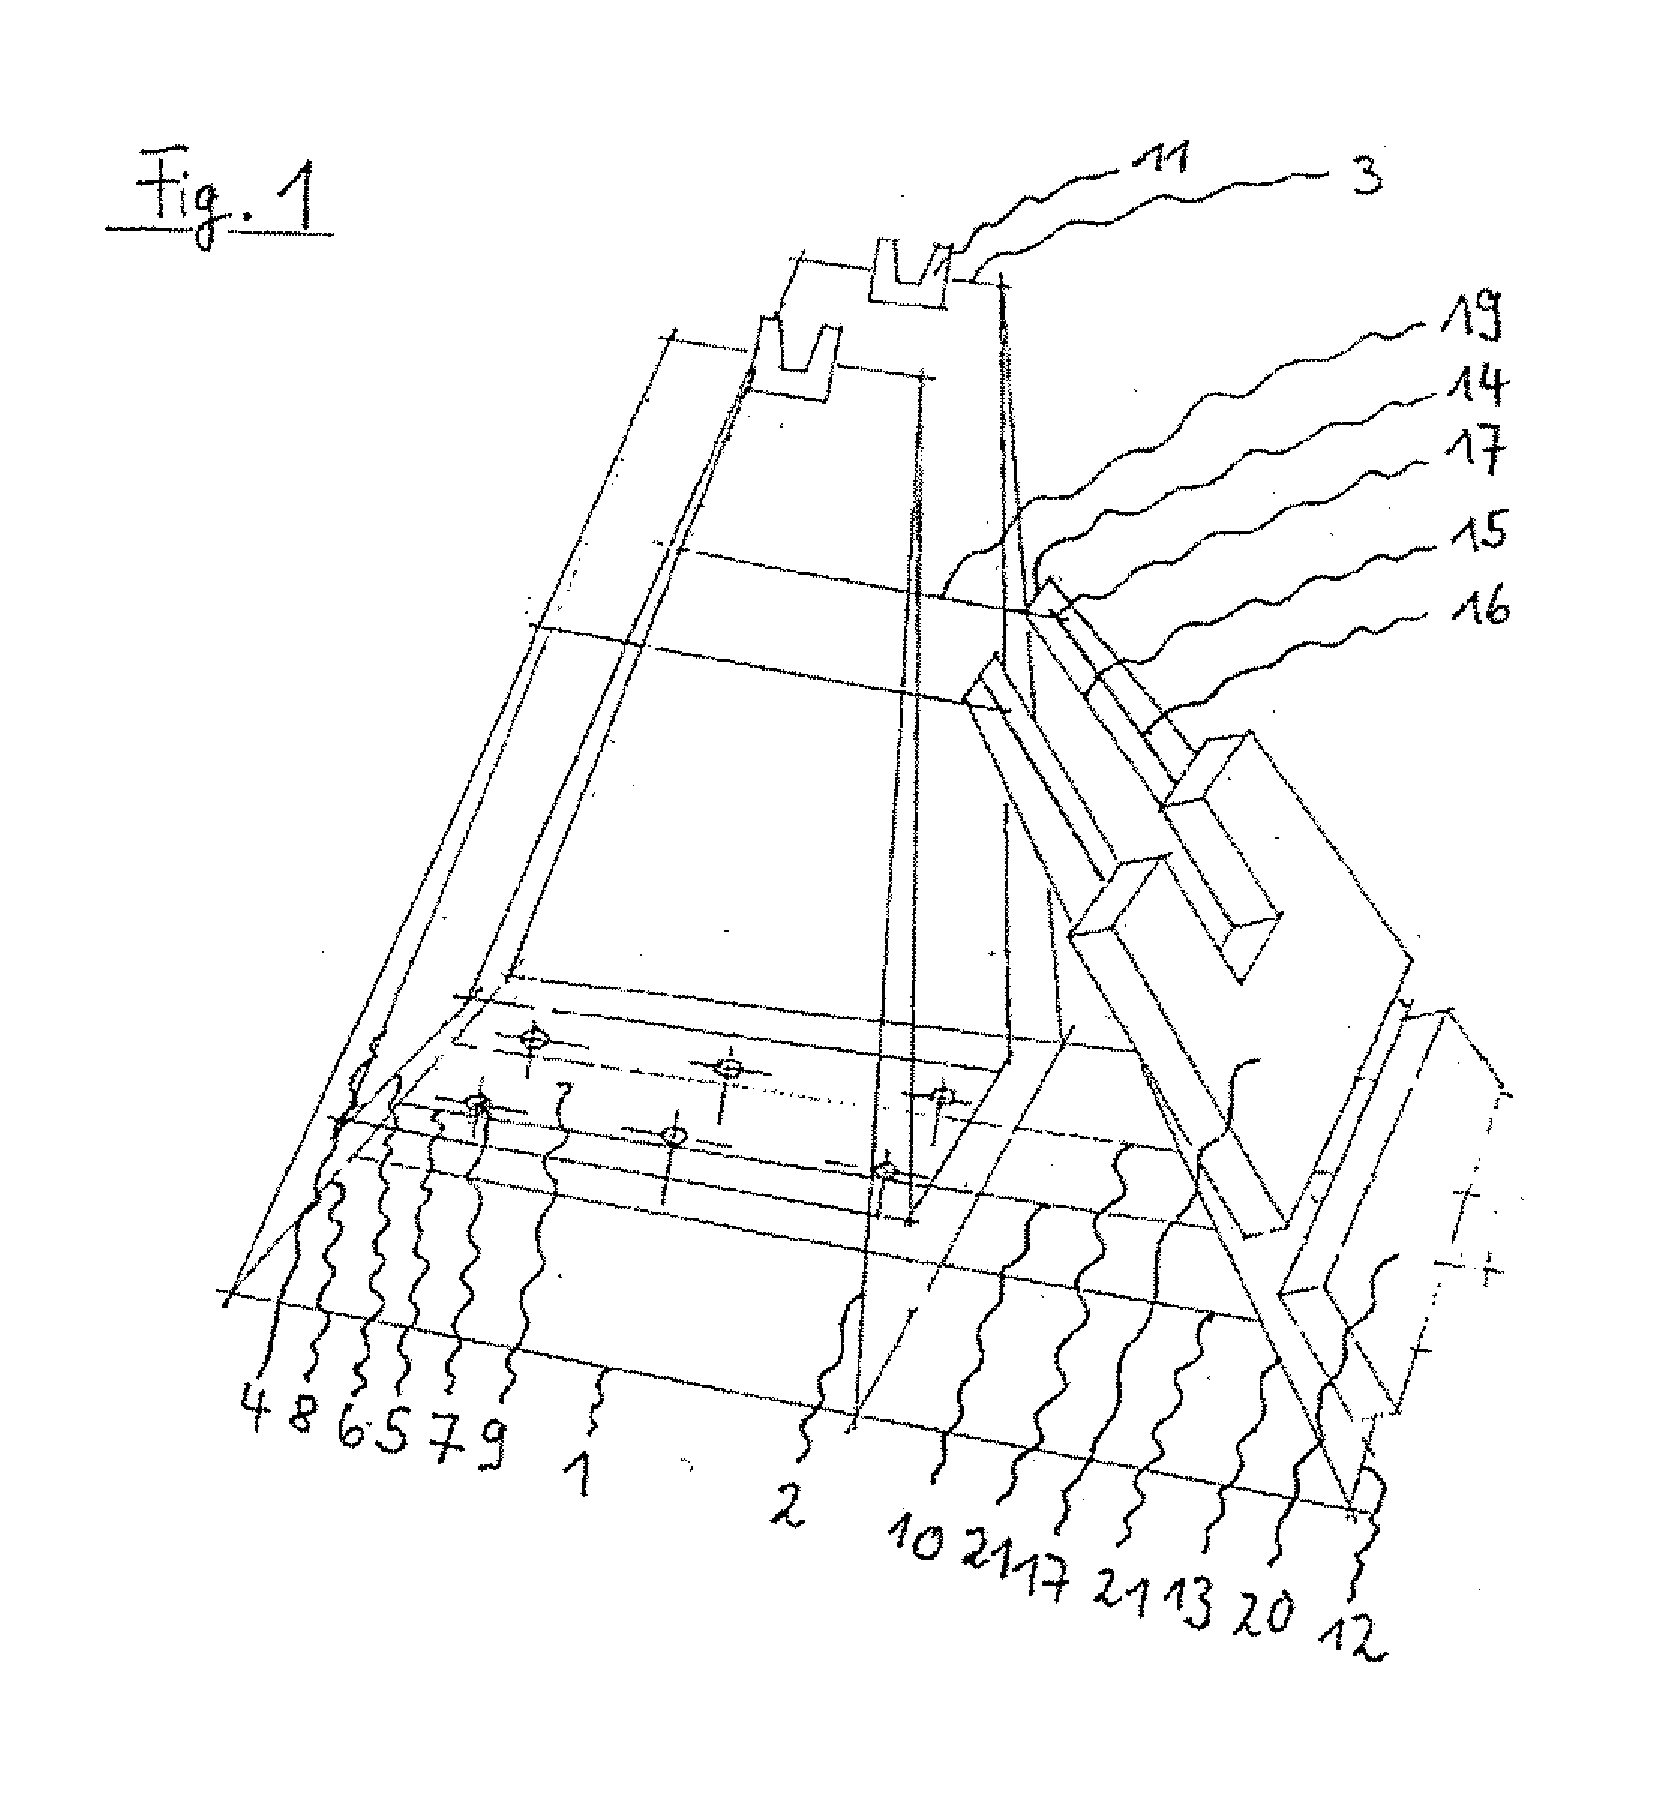 Device for truing and regulating the tension of spoked running wheels